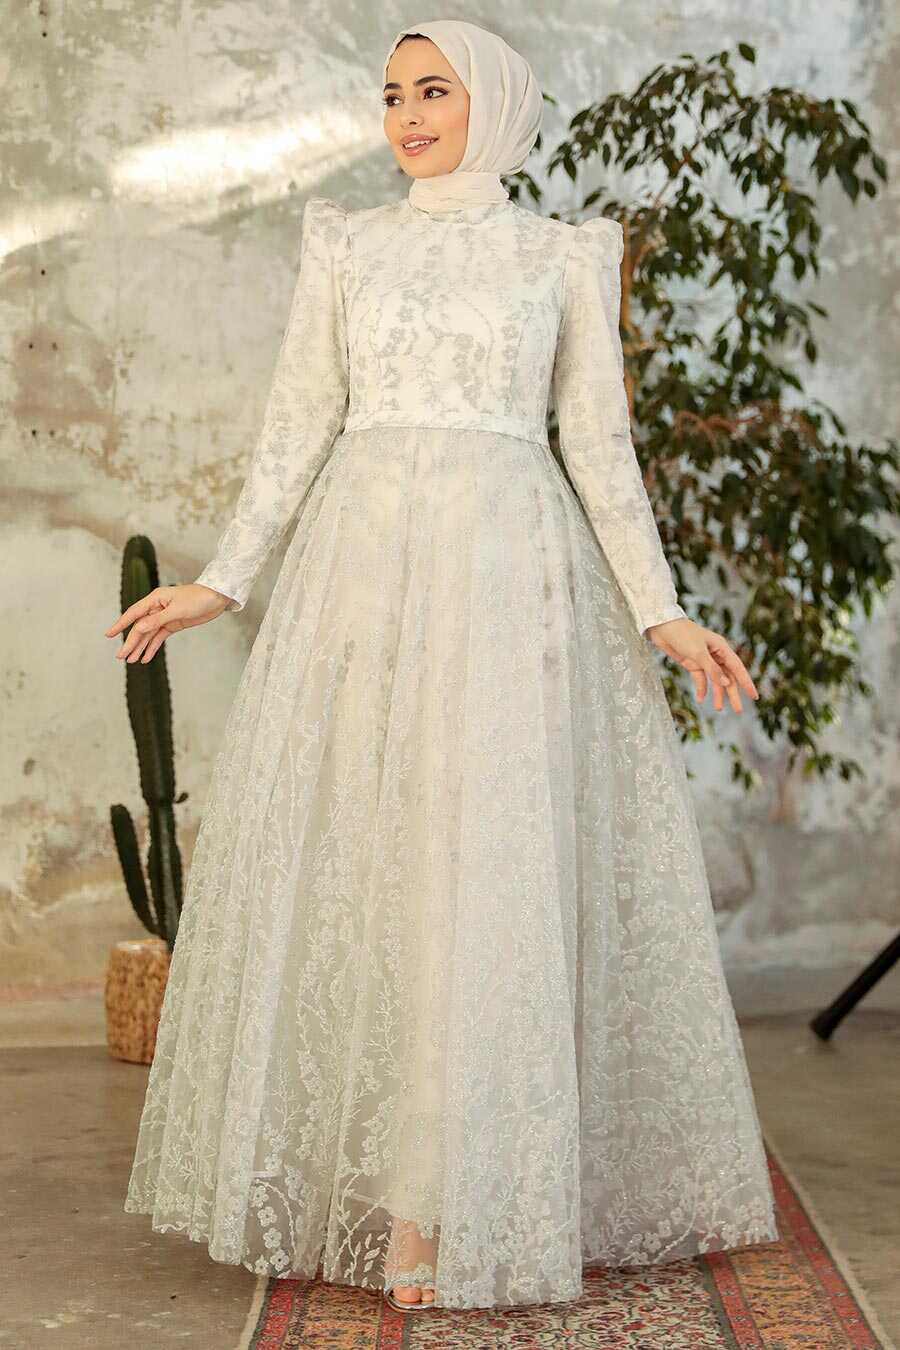 Looking for a muslim wedding dress? Here are some ideas - Styl Inc